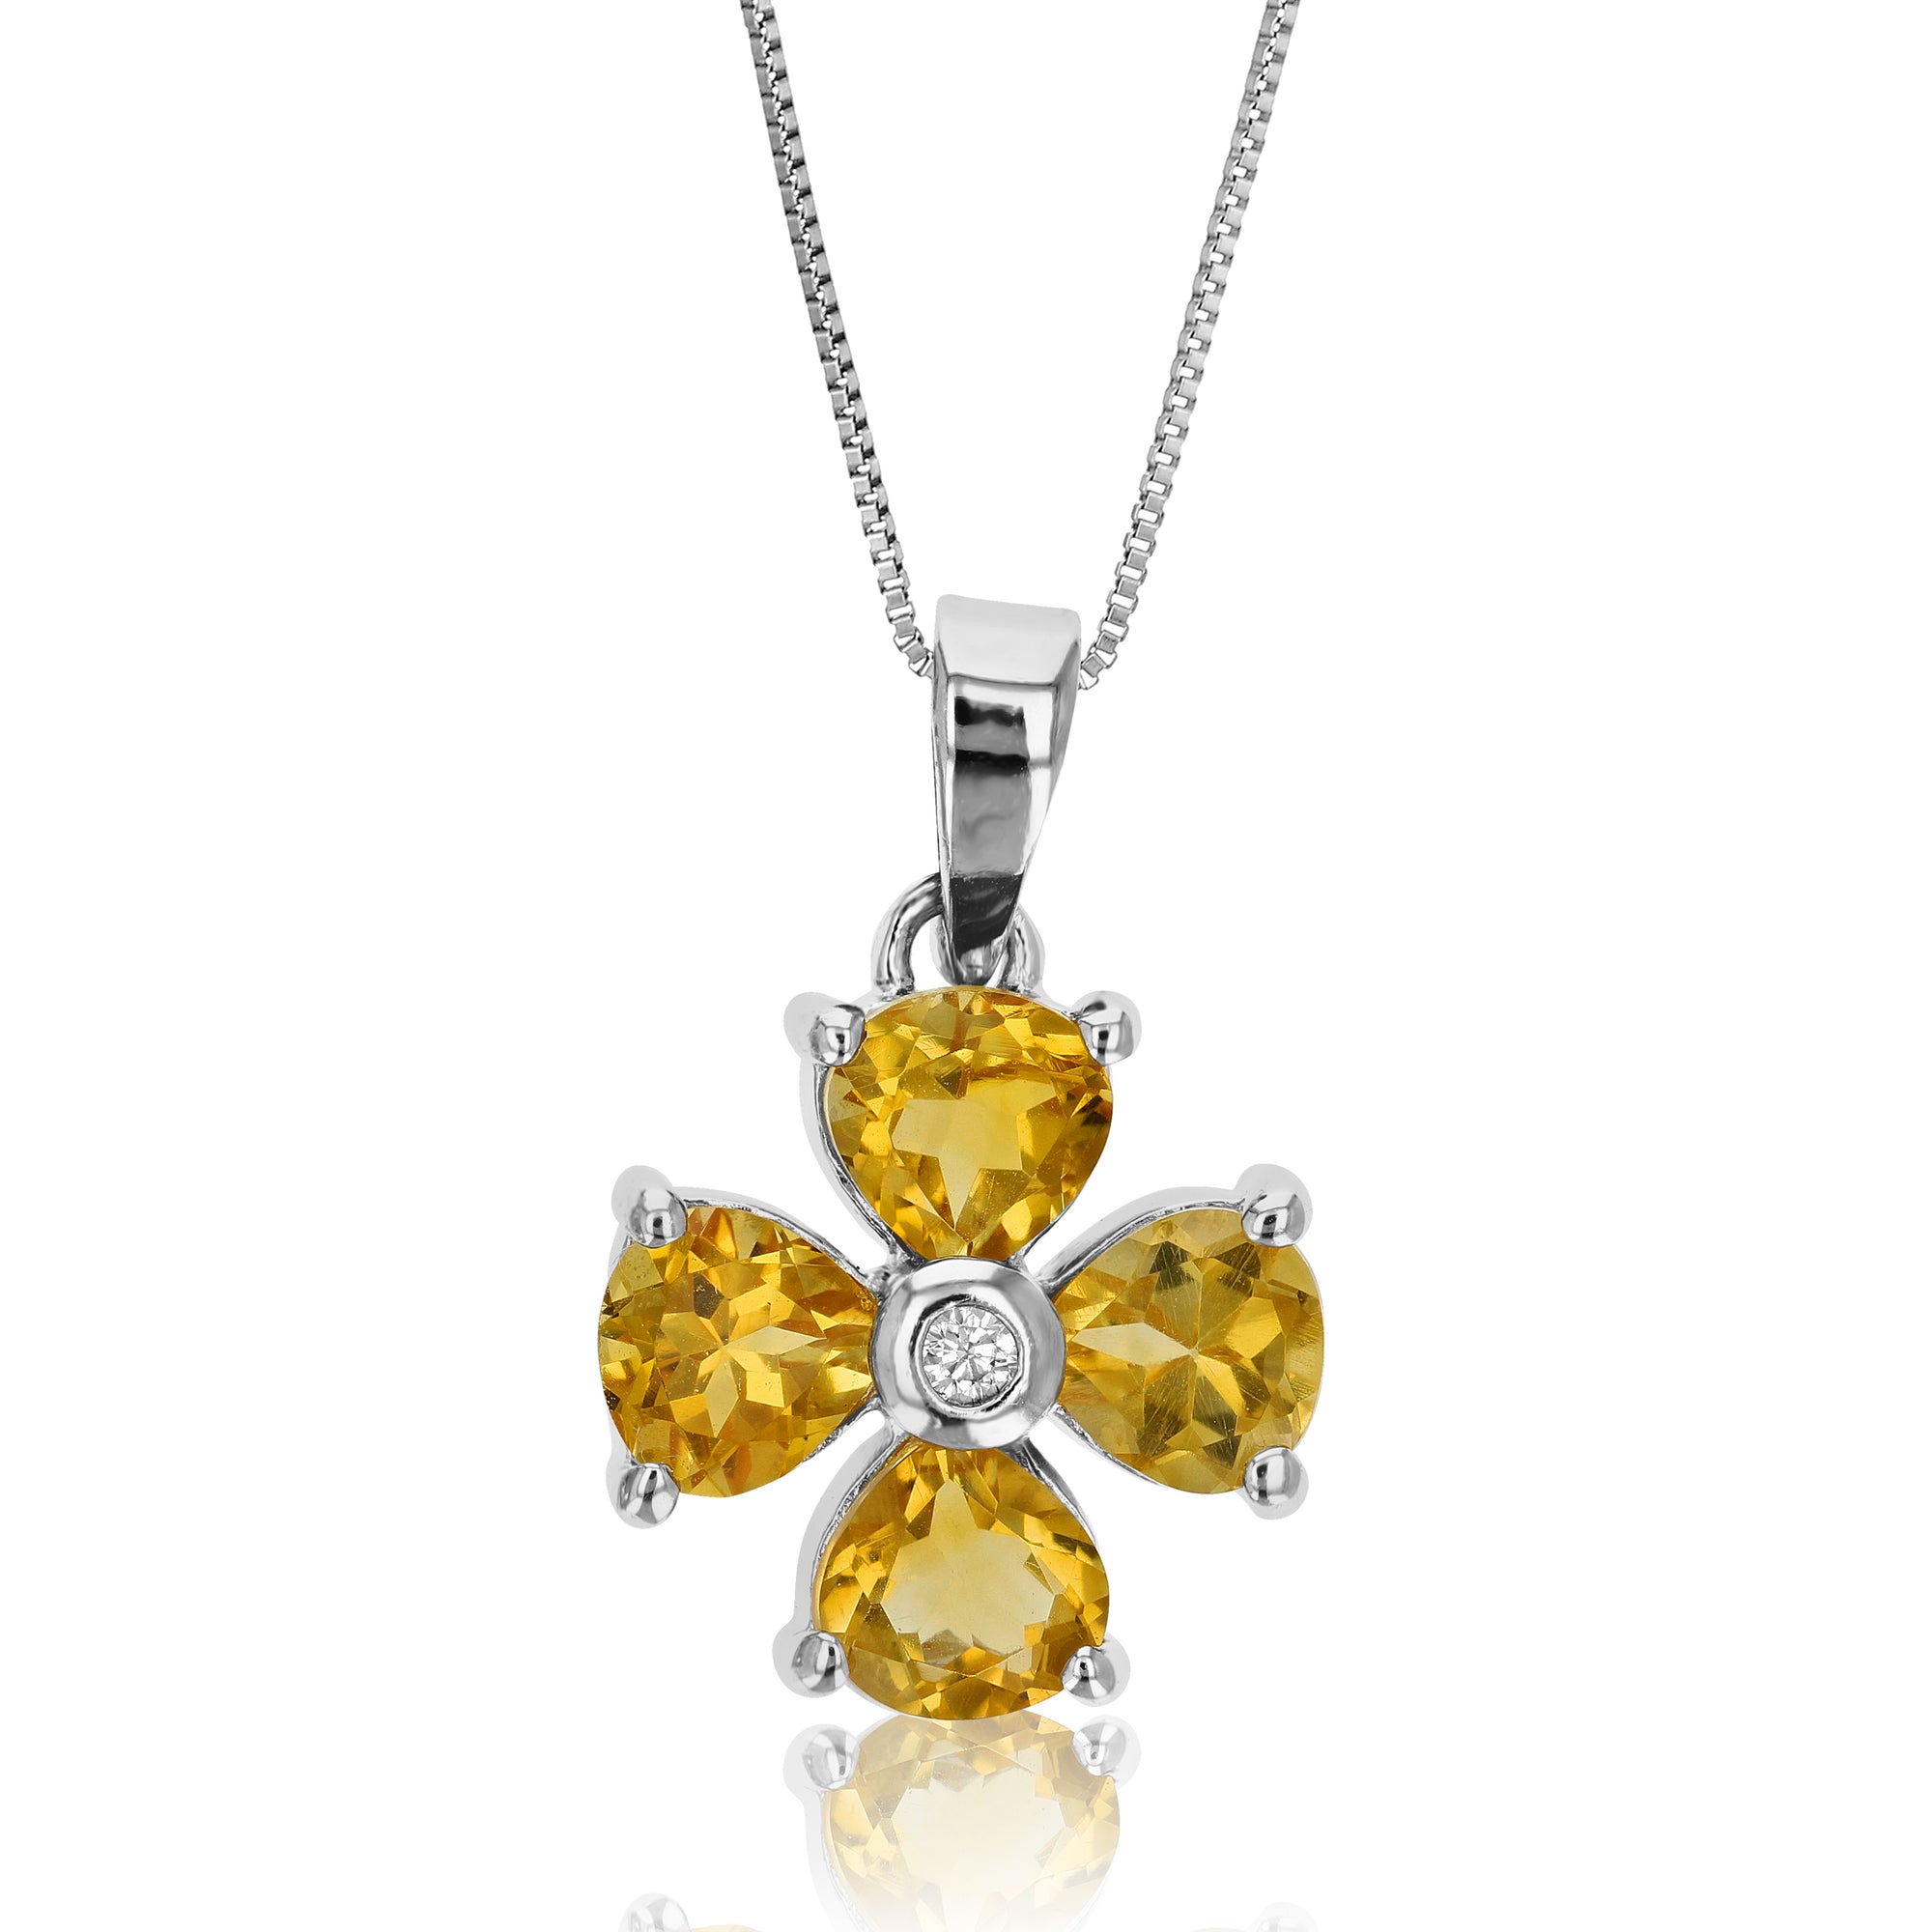 1.10 cttw Pendant Necklace, Citrine Pendant Necklace for Women in .925 Sterling Silver with Rhodium, 18 Inch Chain, Prong Setting